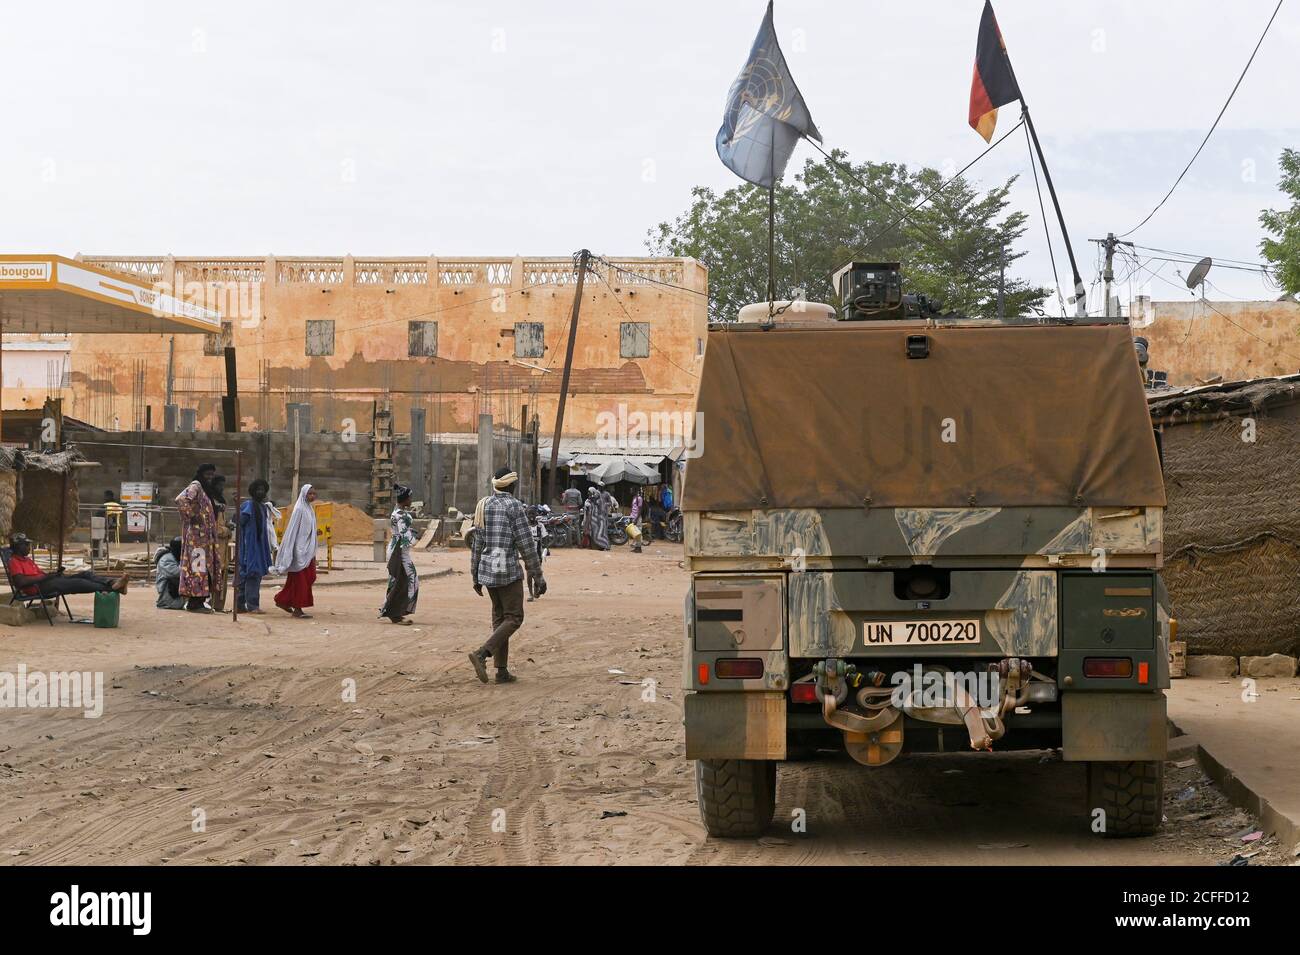 MALI, Gao, Minusma UN mission, german army Bundeswehr on patrol with Eagle armored vehicle in Gao city Stock Photo